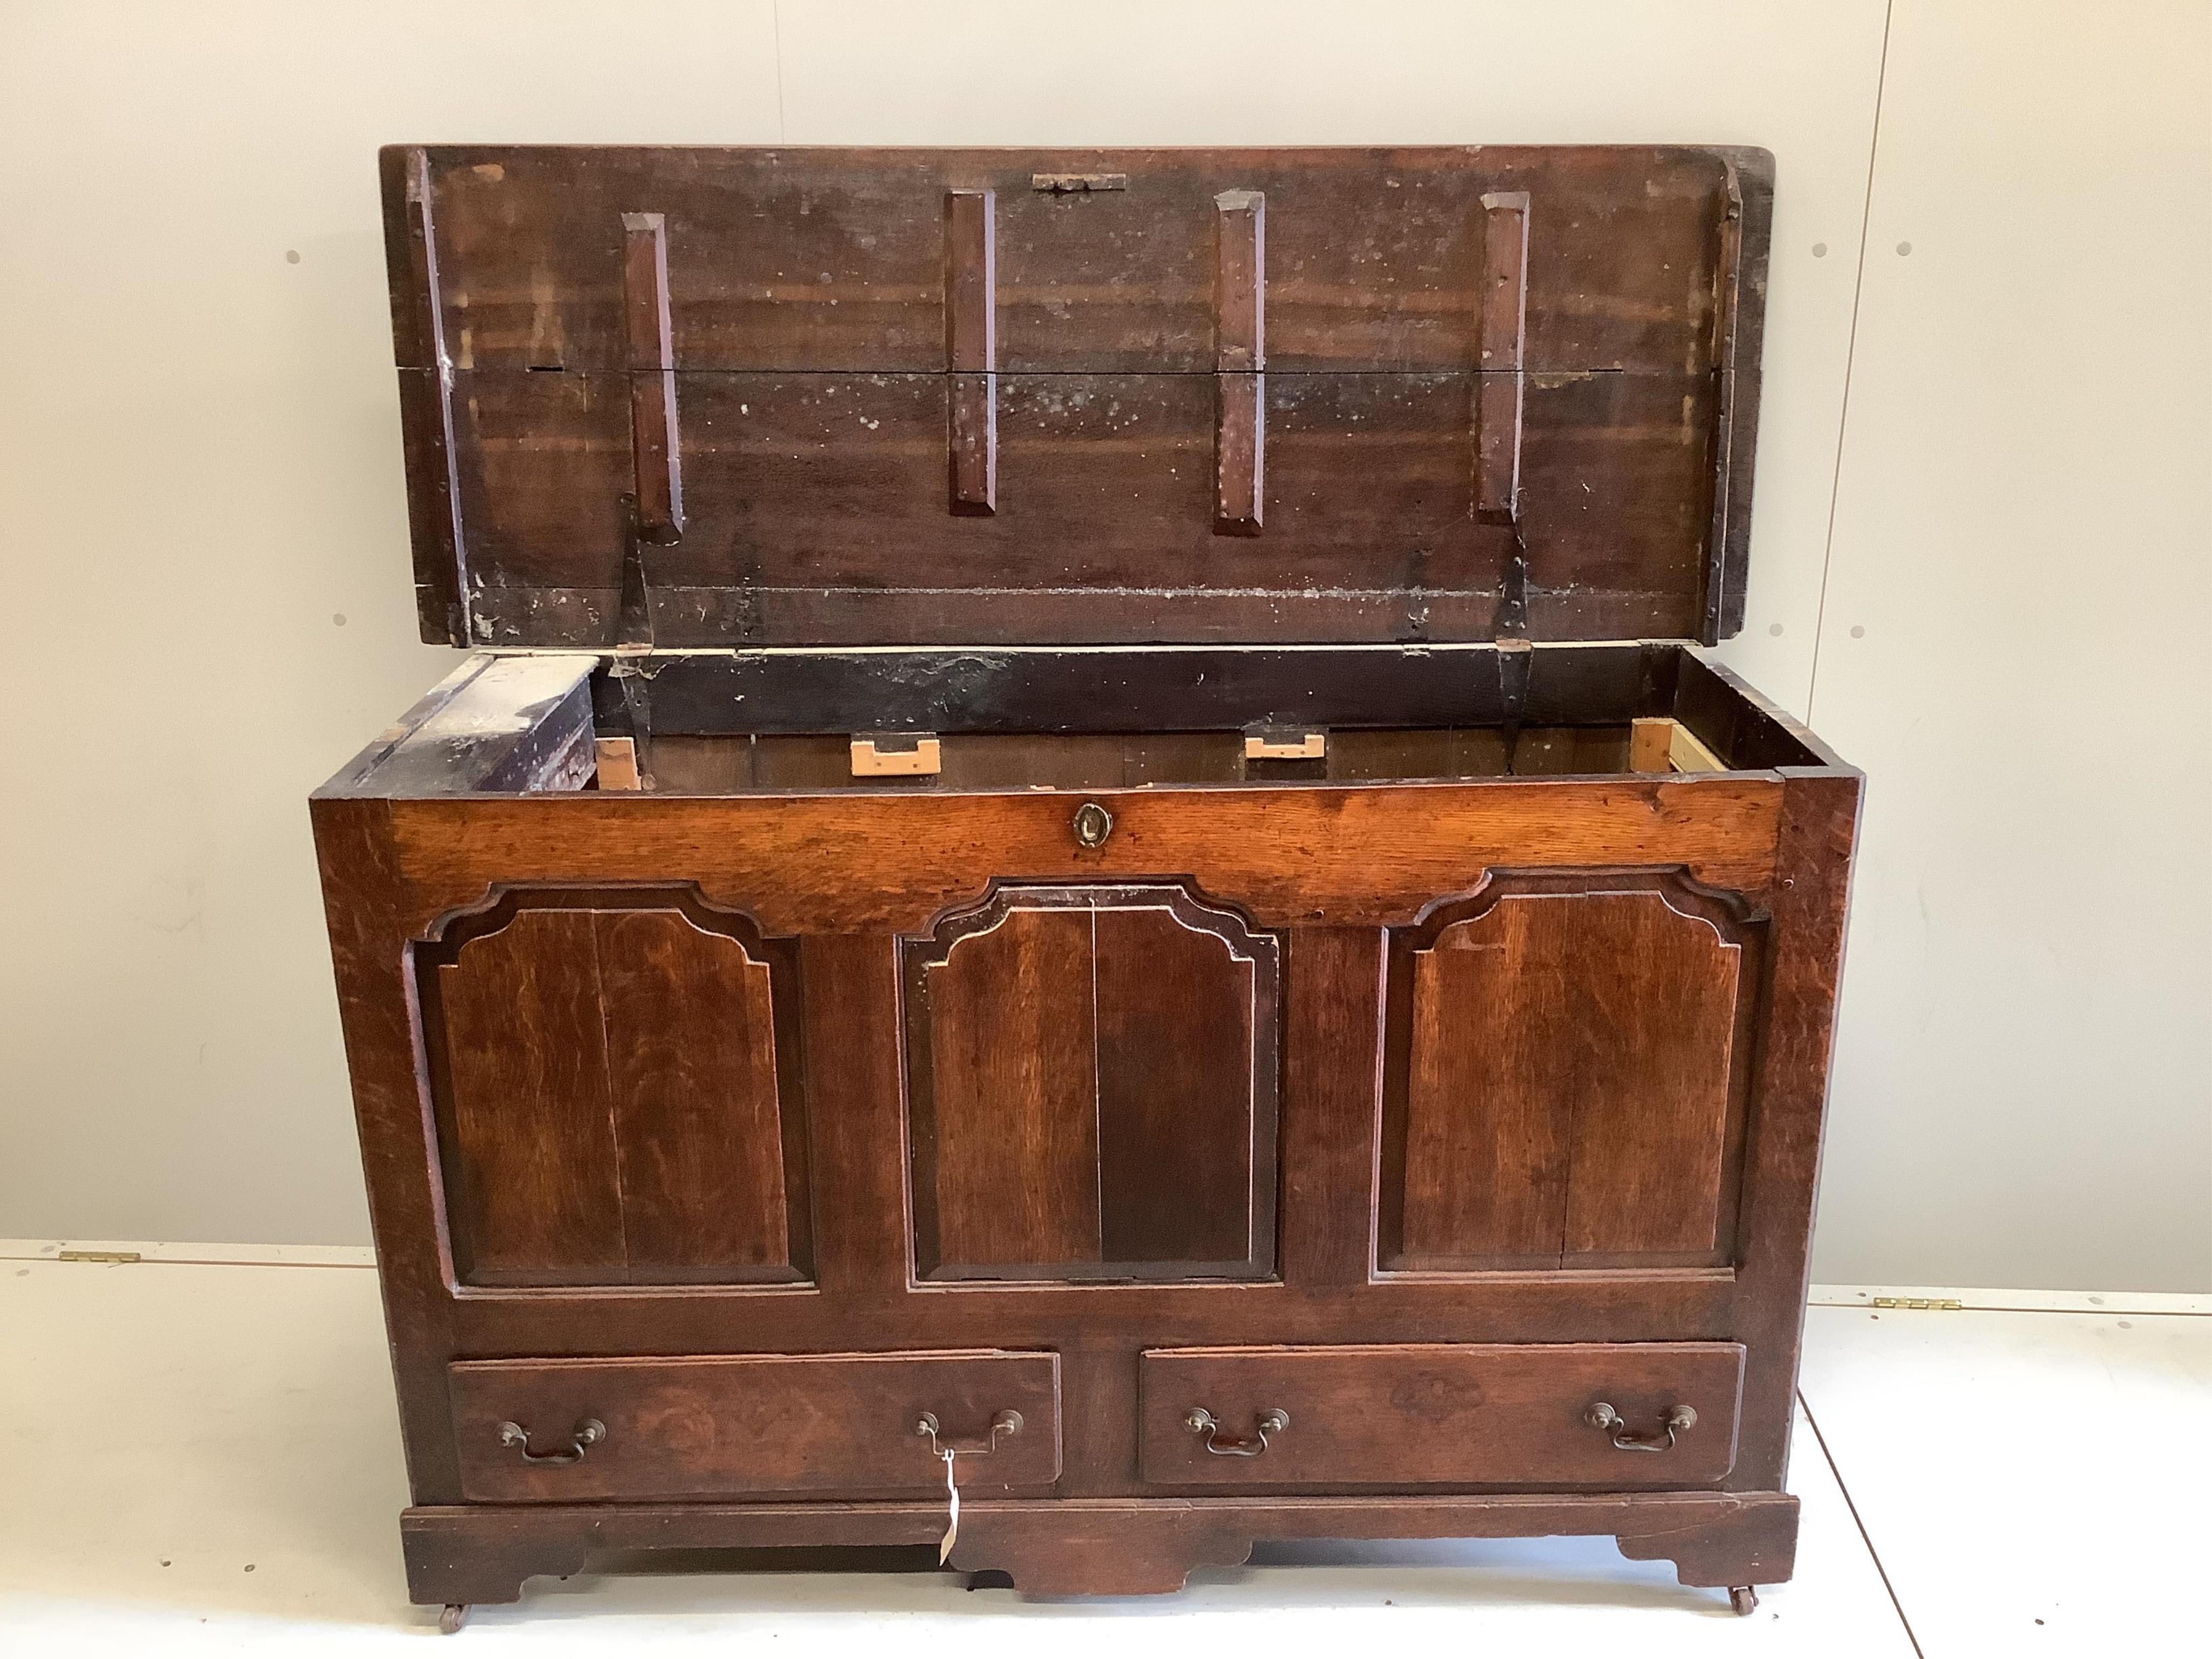 An 18th century panelled oak mule chest, adapted, width 152cm, depth 54cm, height 92cm. Condition - fair